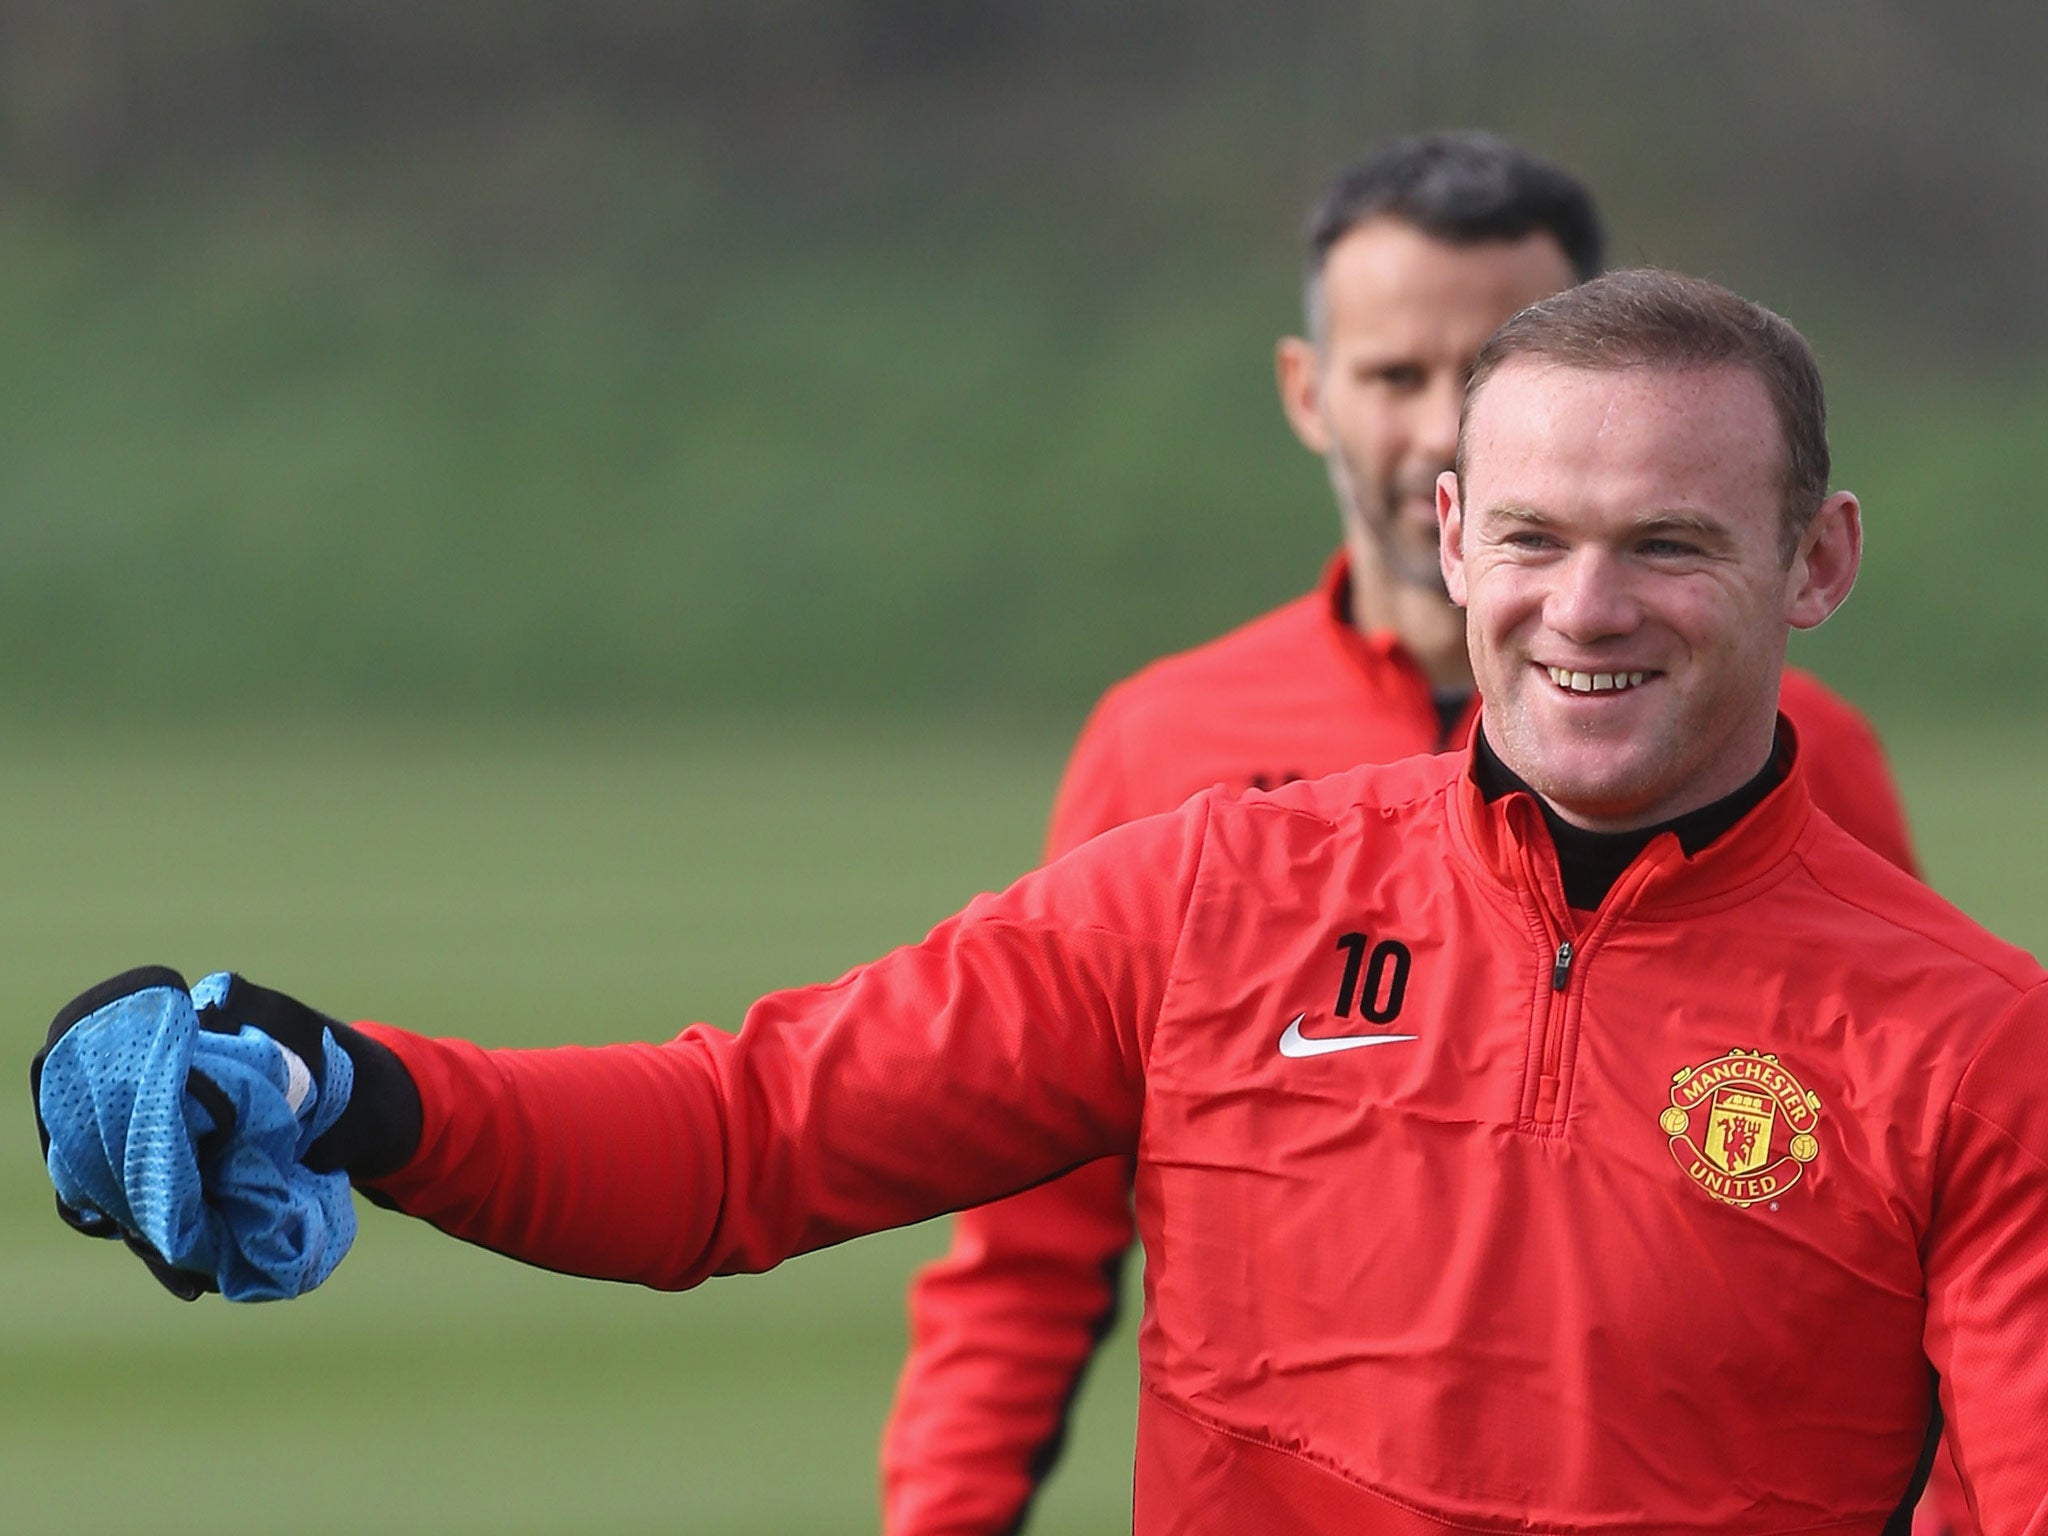 Wayne Rooney trains with Manchester United today